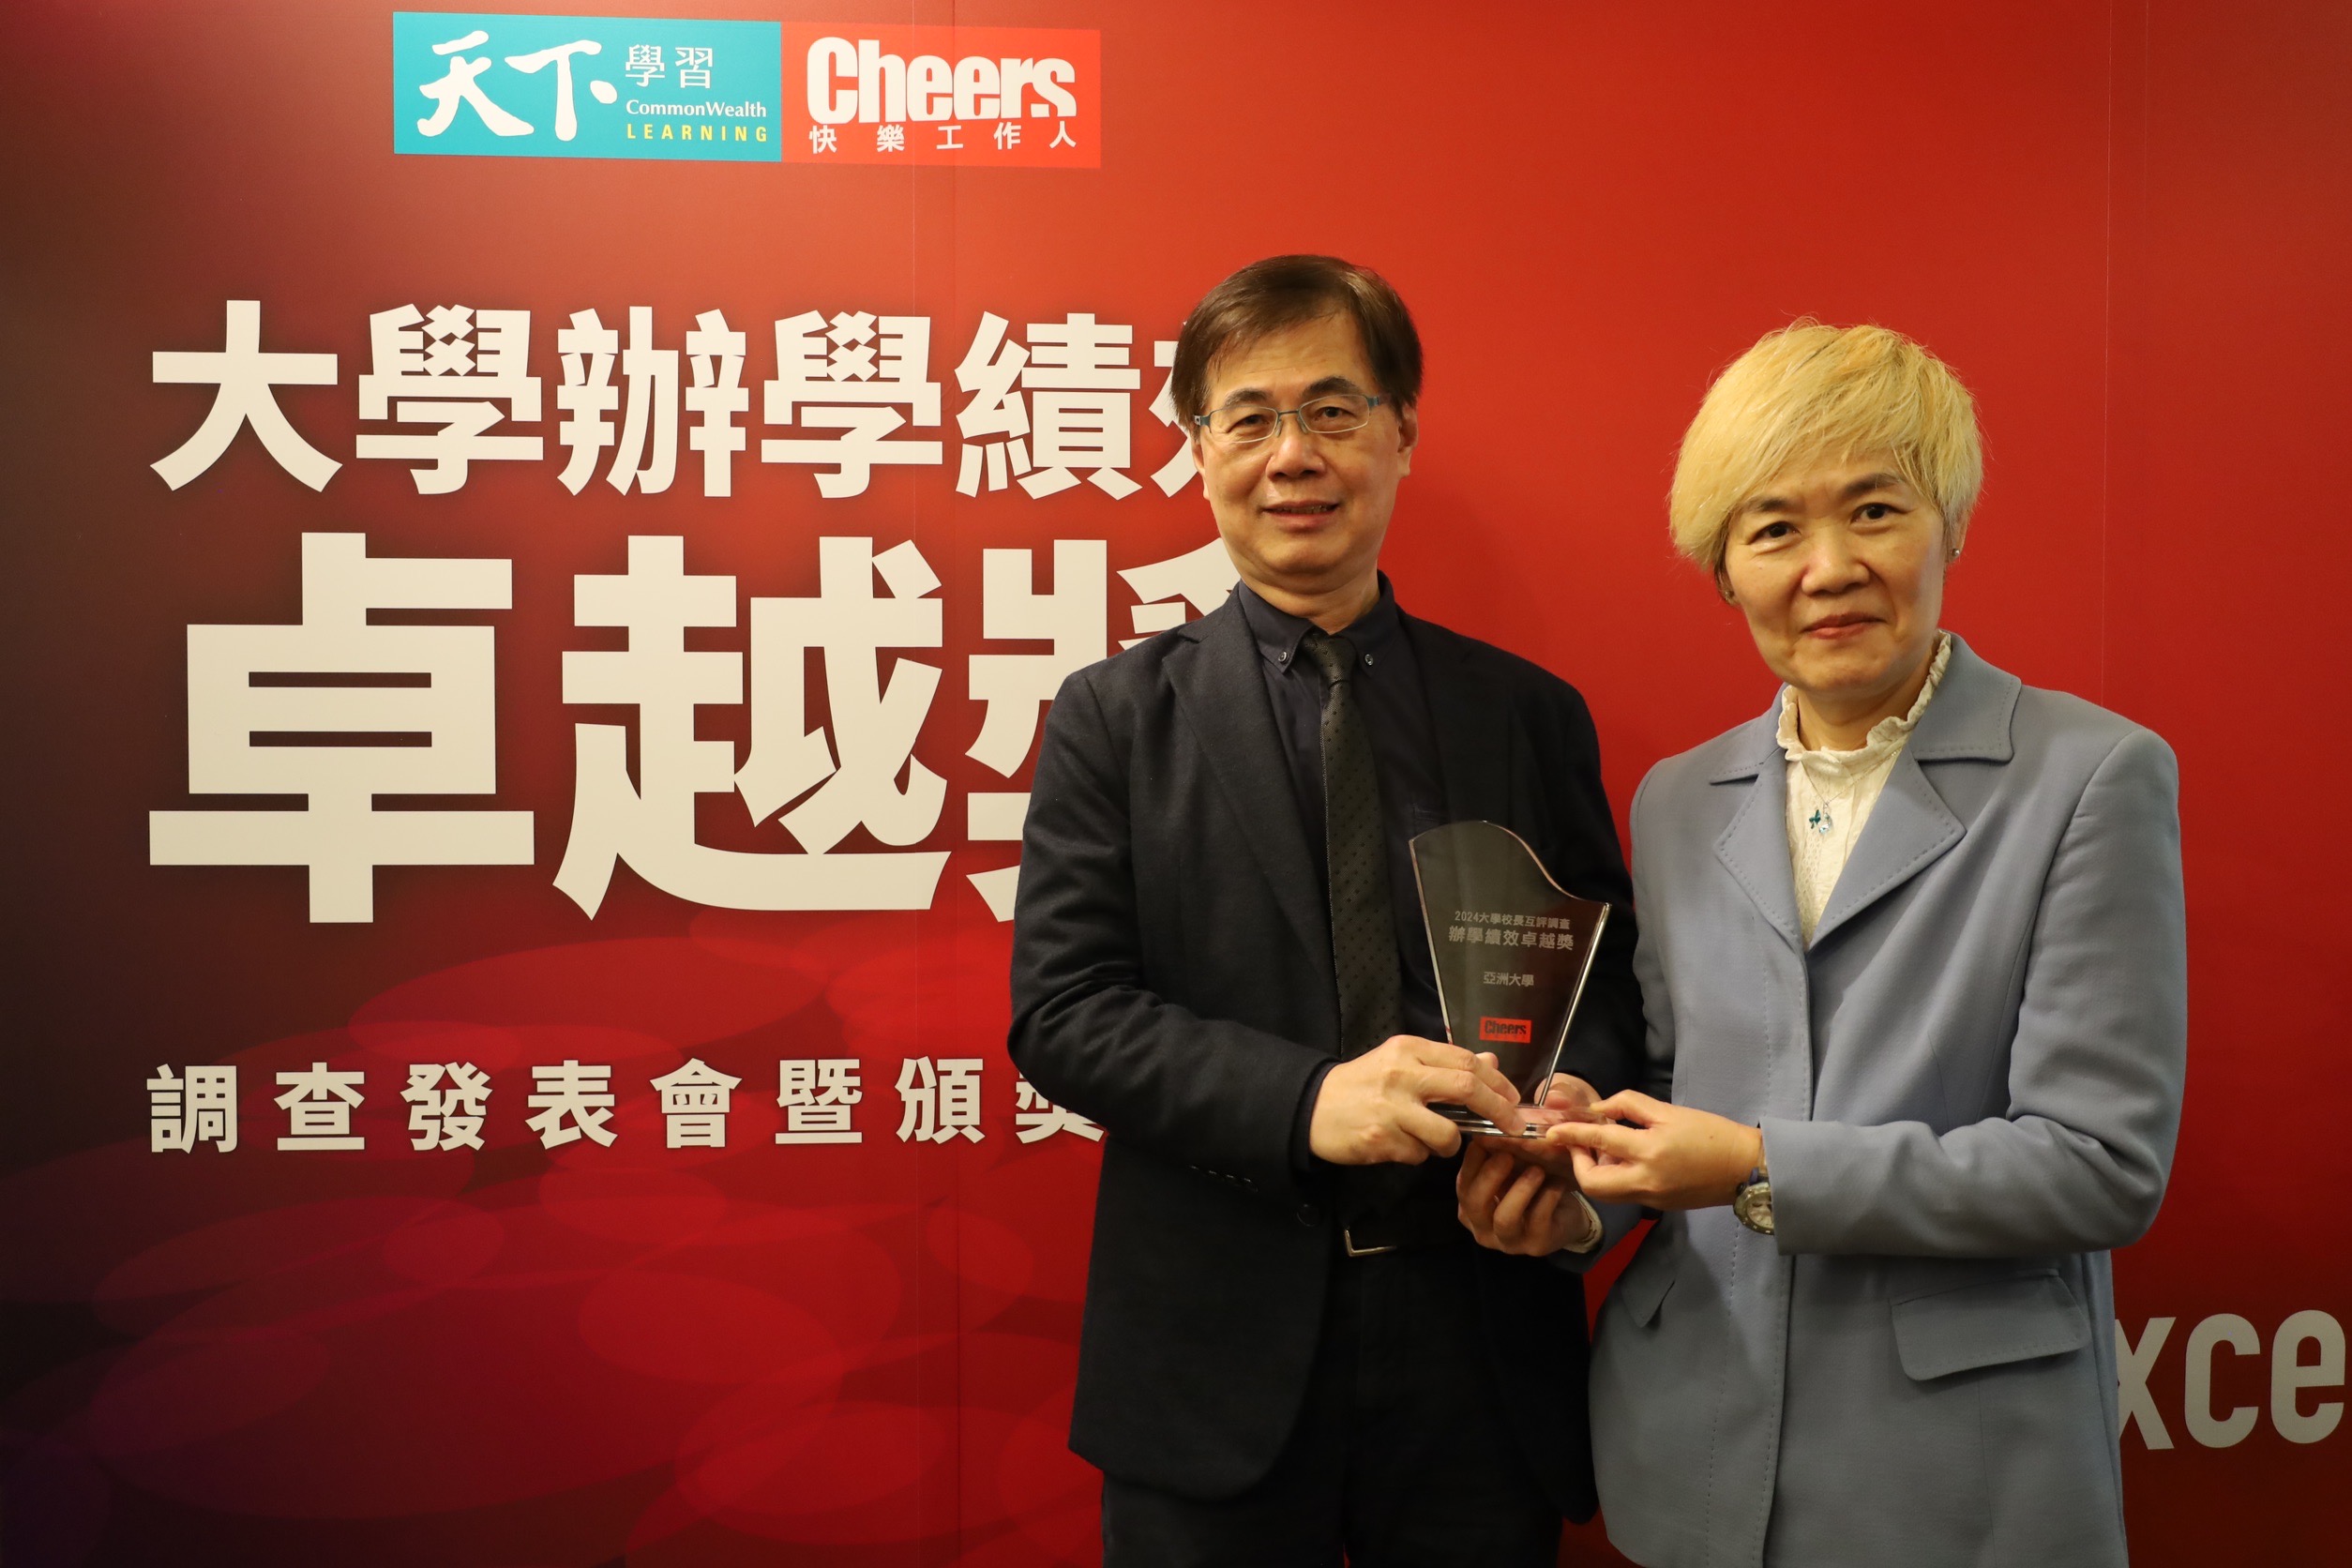 The vice president, Cheng-Lein Teng (left), received the award and posed for a photo with the chairman of Cheers magazine, Ying-Chun Wu.